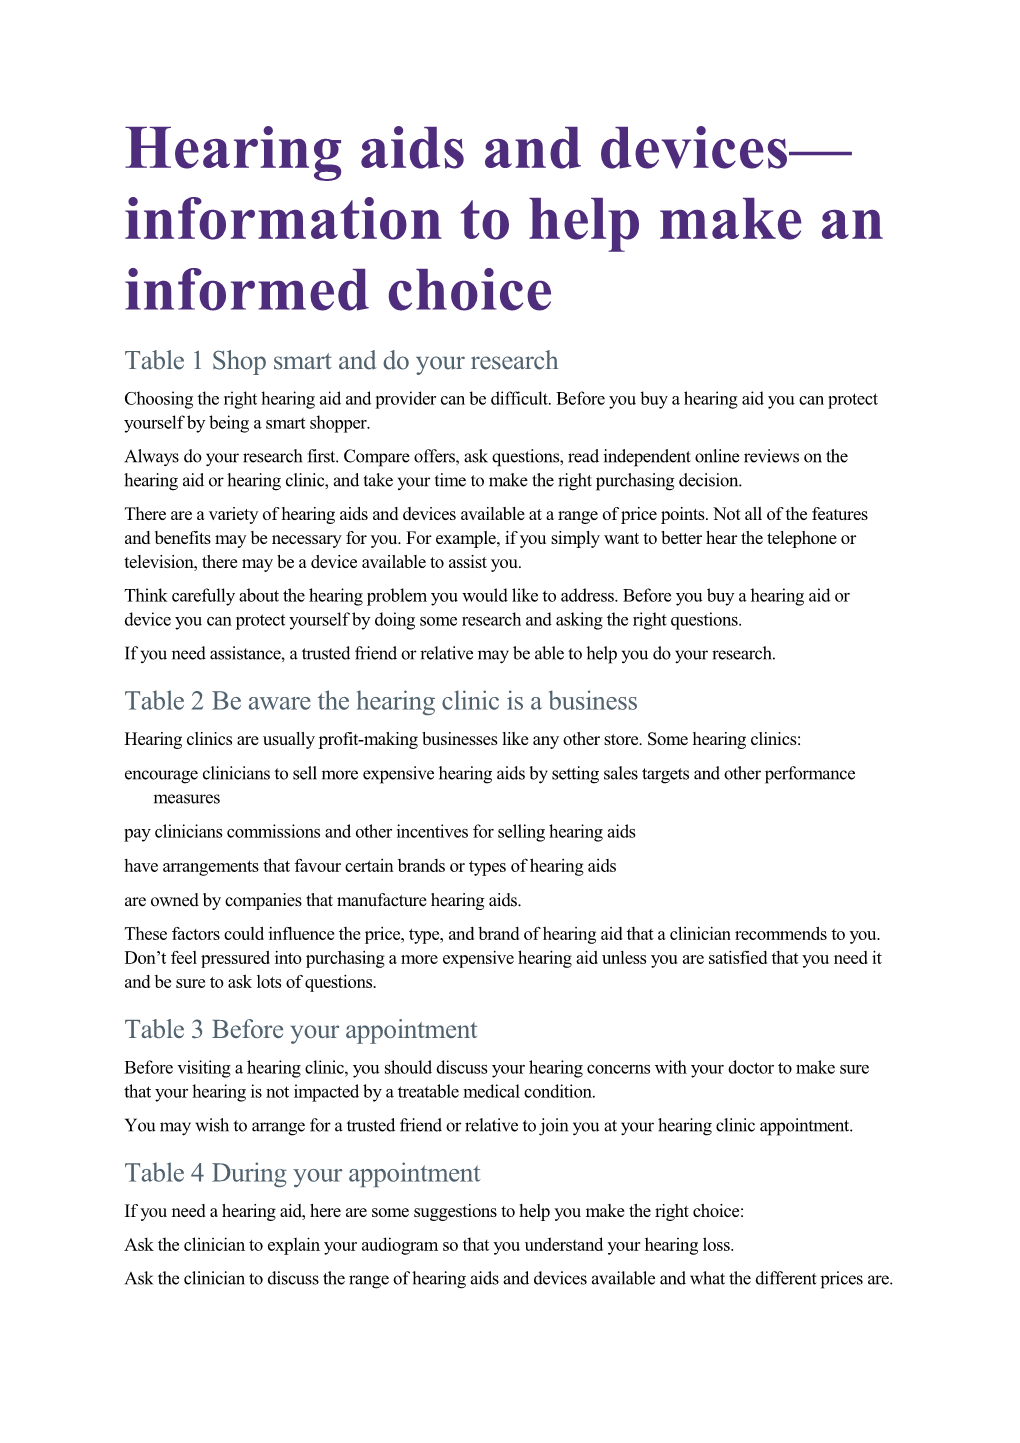 Hearing Aids and Devices Information to Help Make an Informed Choice